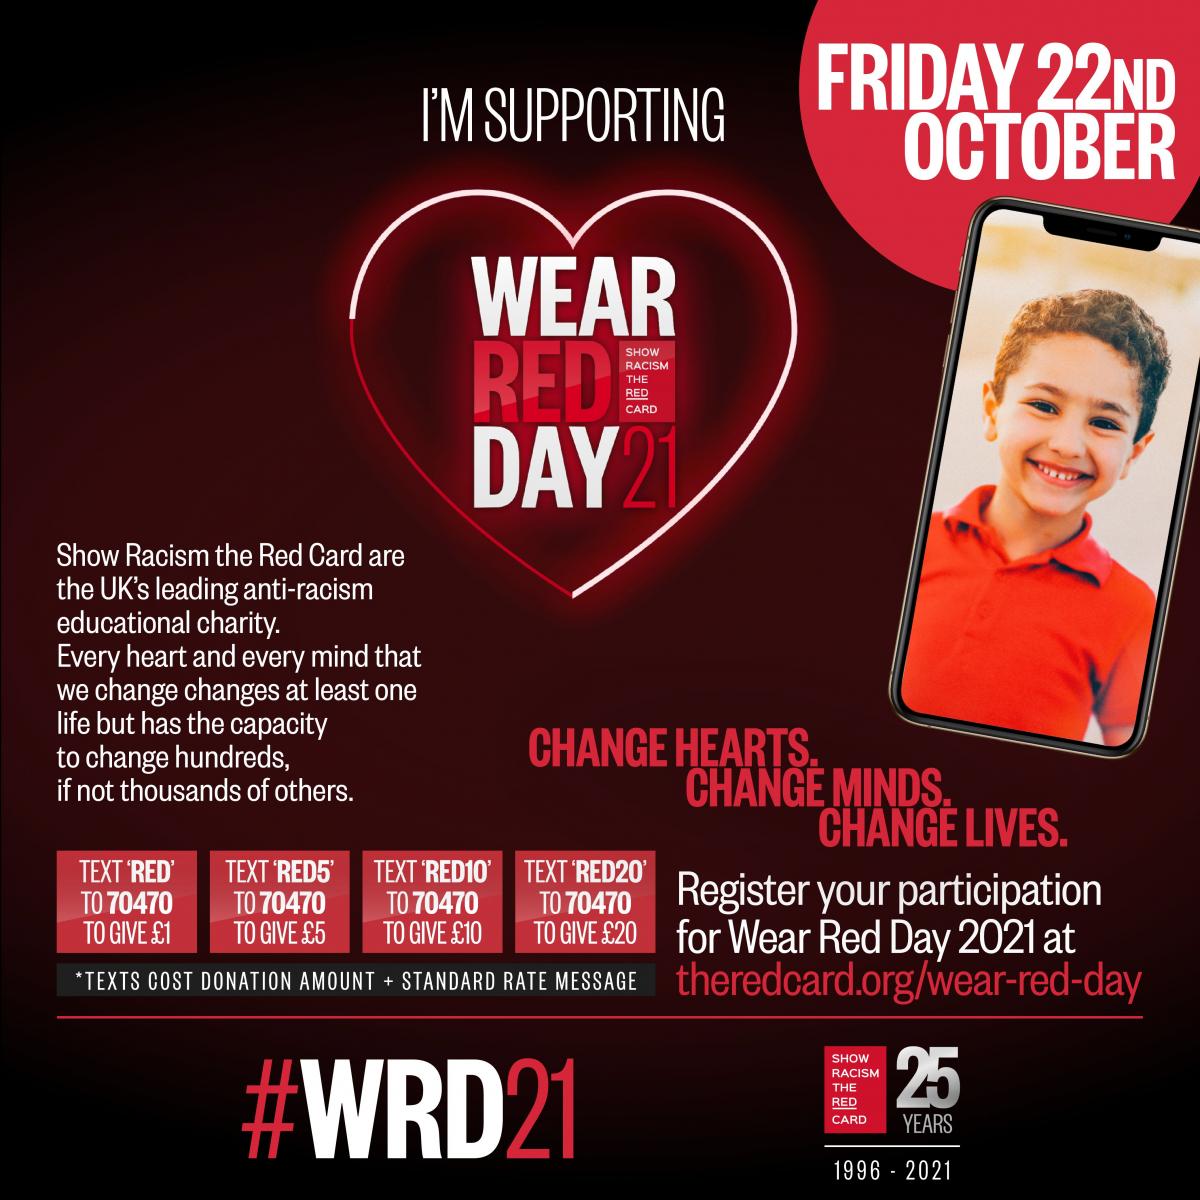 Show Racism the Red Card – Wear Red Day 2021